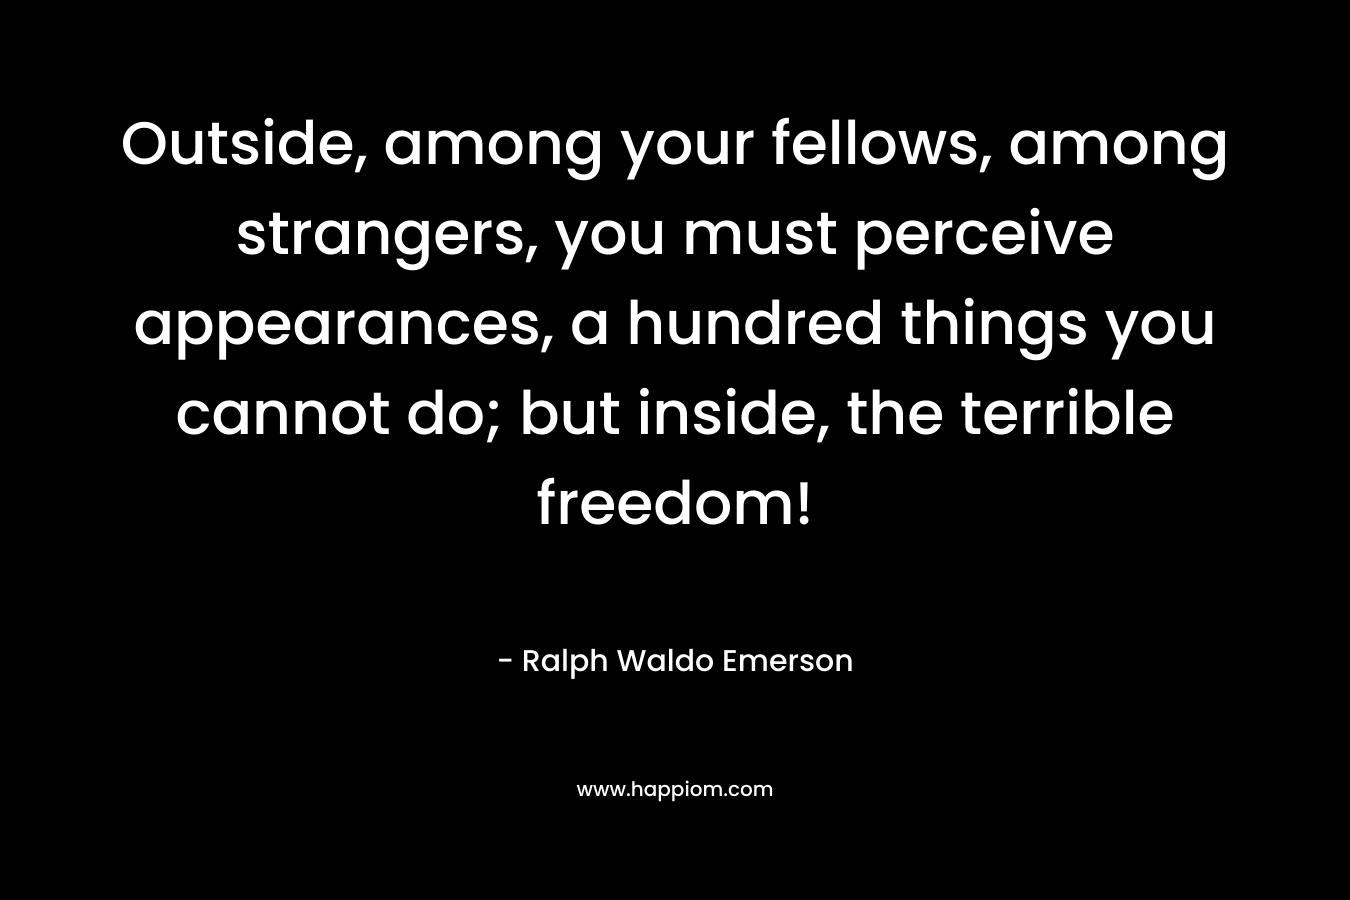 Outside, among your fellows, among strangers, you must perceive appearances, a hundred things you cannot do; but inside, the terrible freedom!